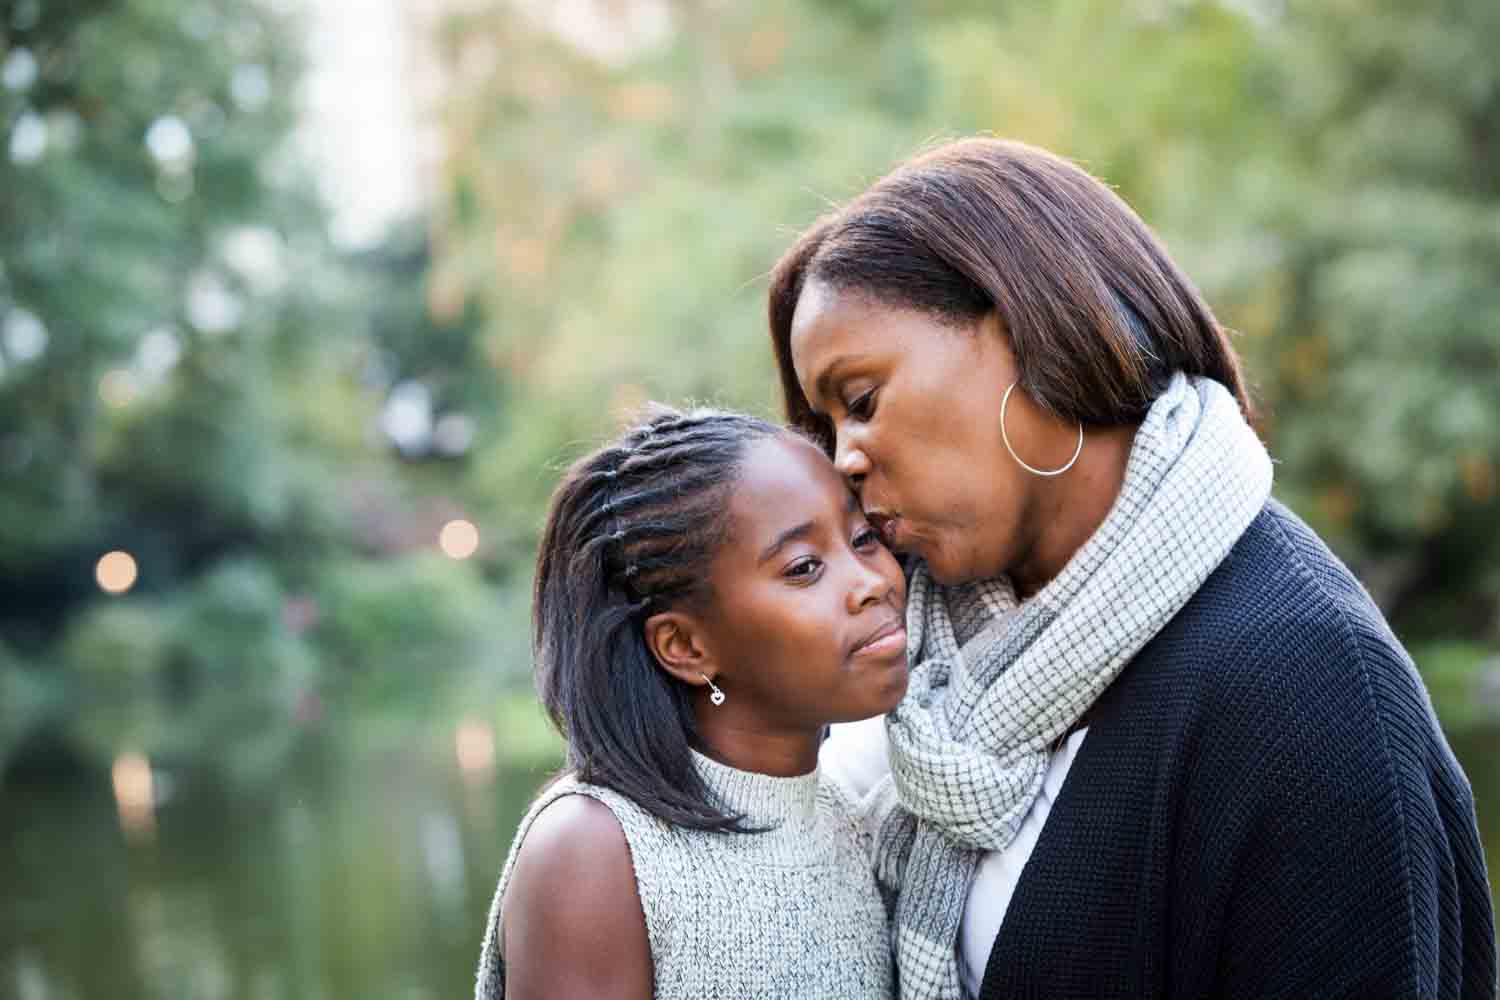 Central Park fall family portrait of mother kissing daughter's face